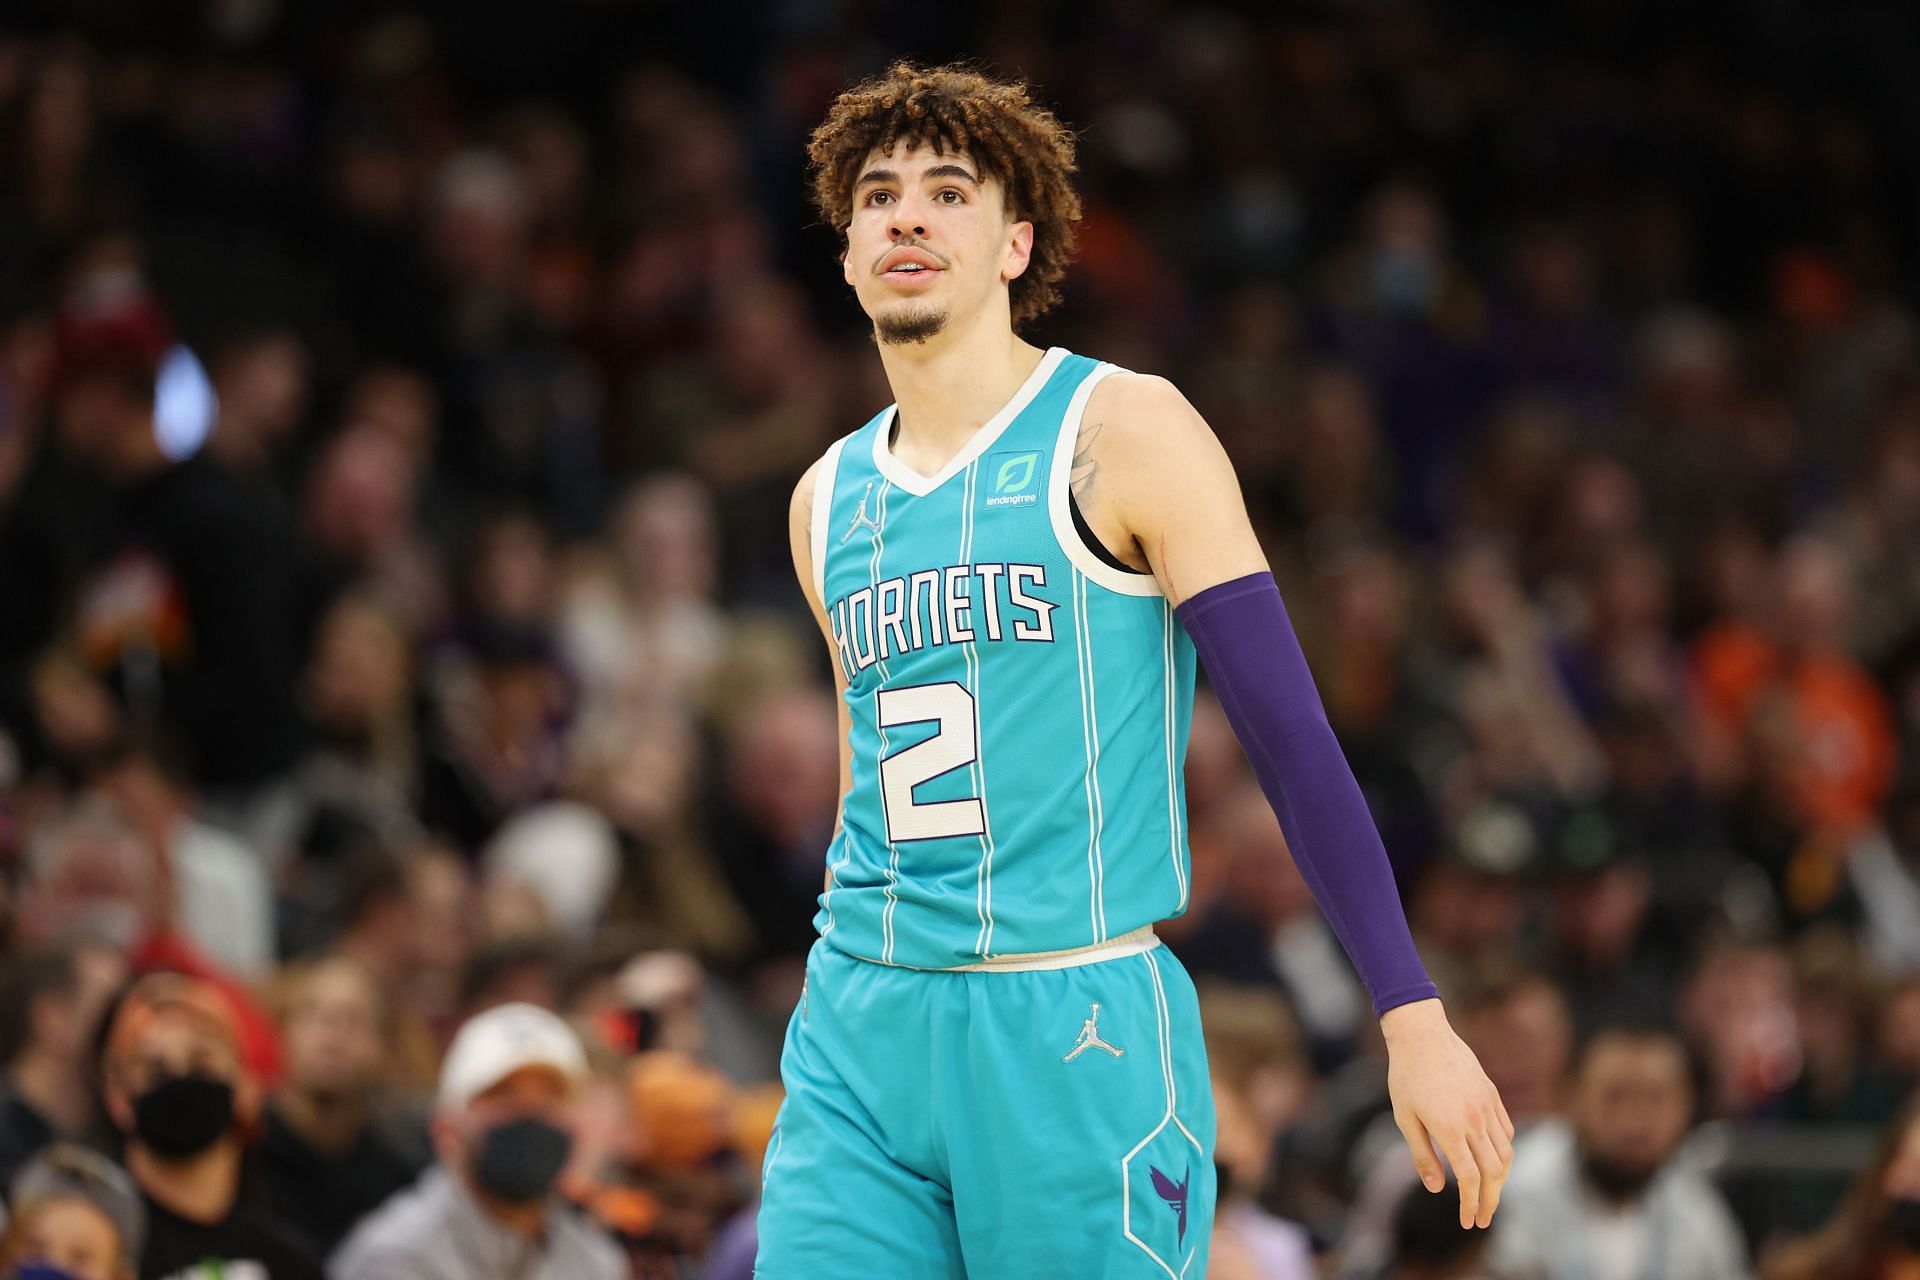 LaMelo Ball of the Charlotte Hornets during the second half on Dec. 19 in Phoenix, Arizona. The Phoenix Suns defeated the Hornets 137-106.